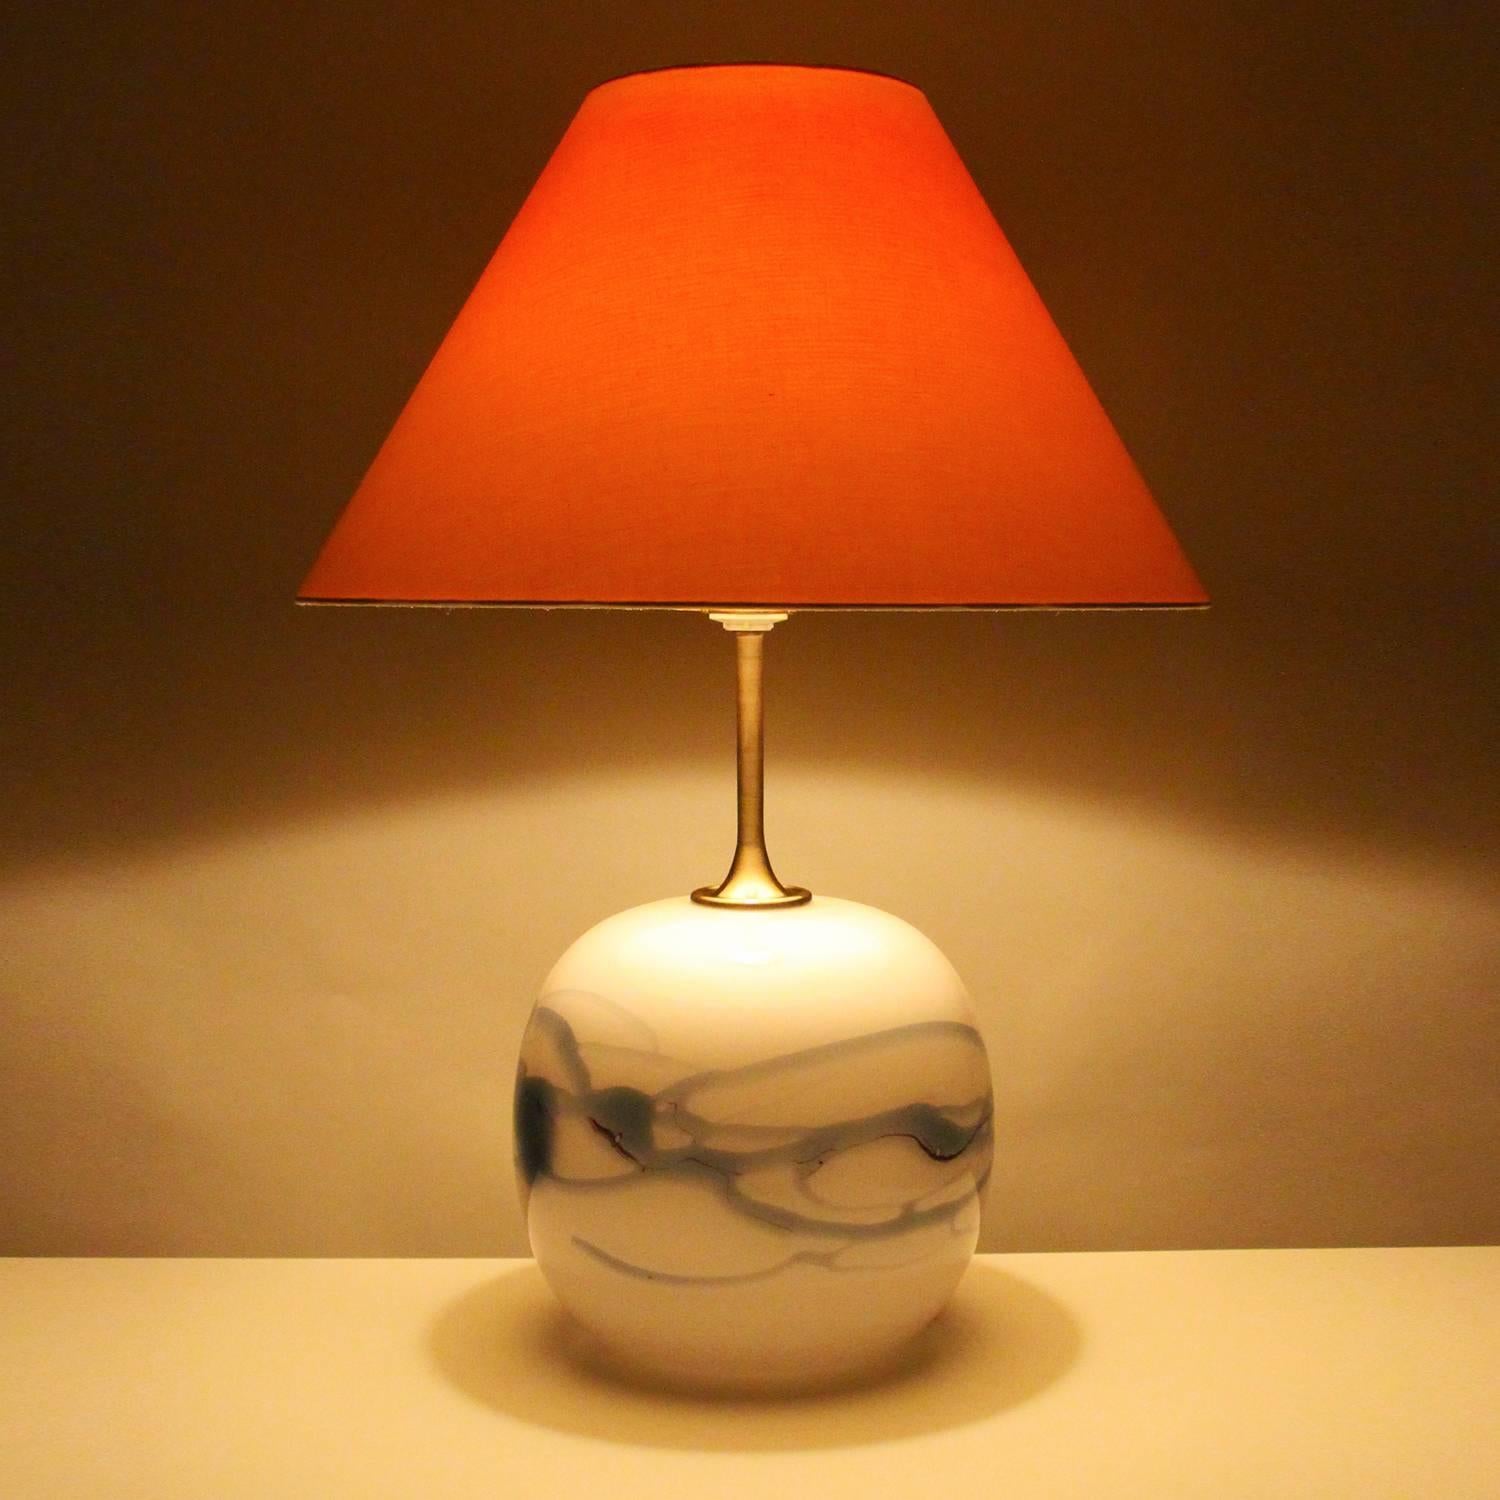 Sakura, large blown glass table lamp by Michael Bang in 1980 for Holmegaard glassworks - beautiful milky white and blue lamp stand with large colorful shade included, in excellent vintage condition.

This large round lamp stand is made up of milky